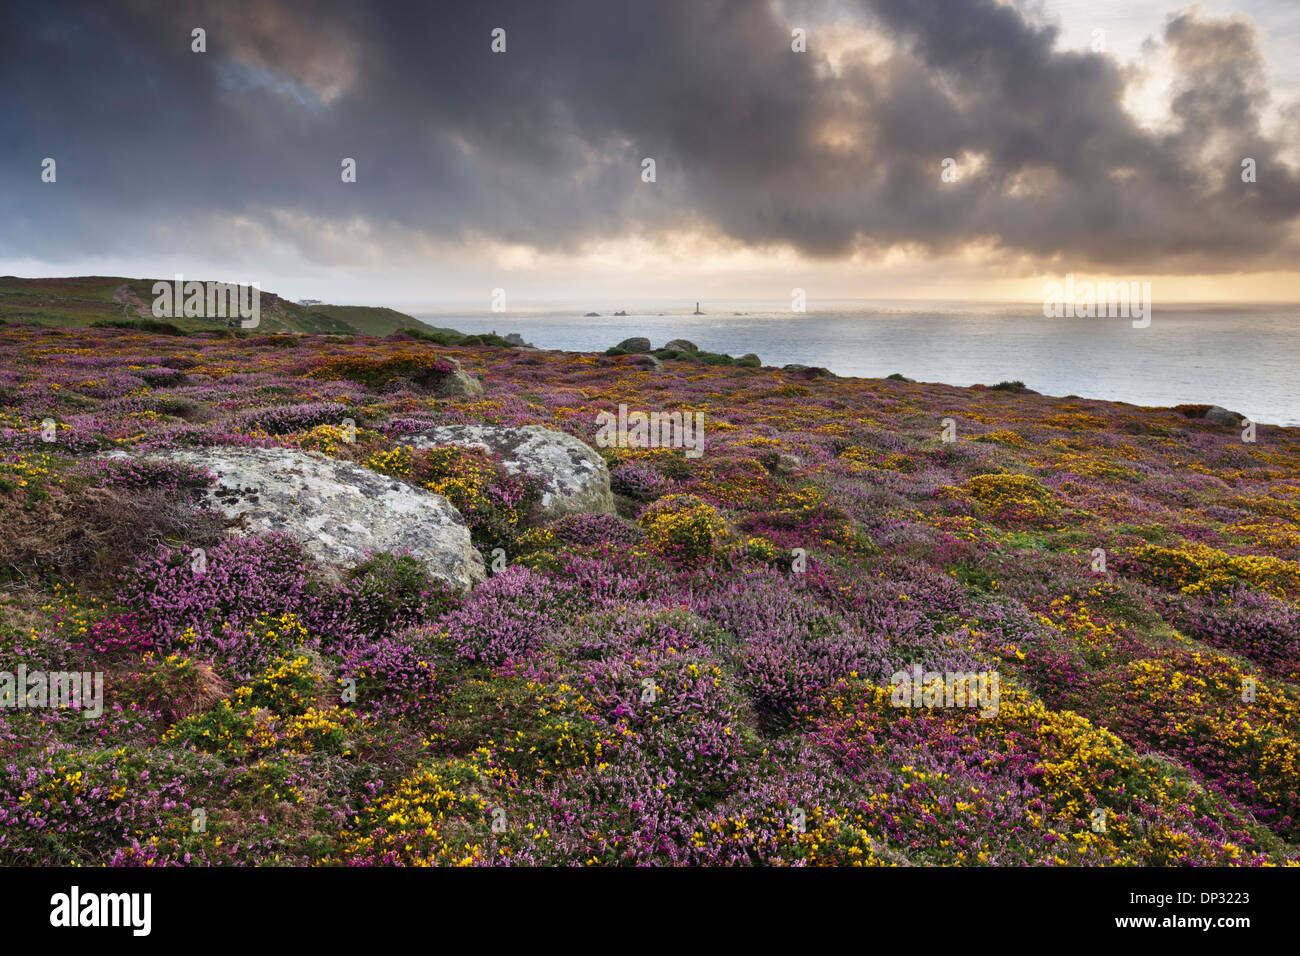 A profusion of wild heather and gorse growing on the Cornish clifftop at Land's End Stock Photo